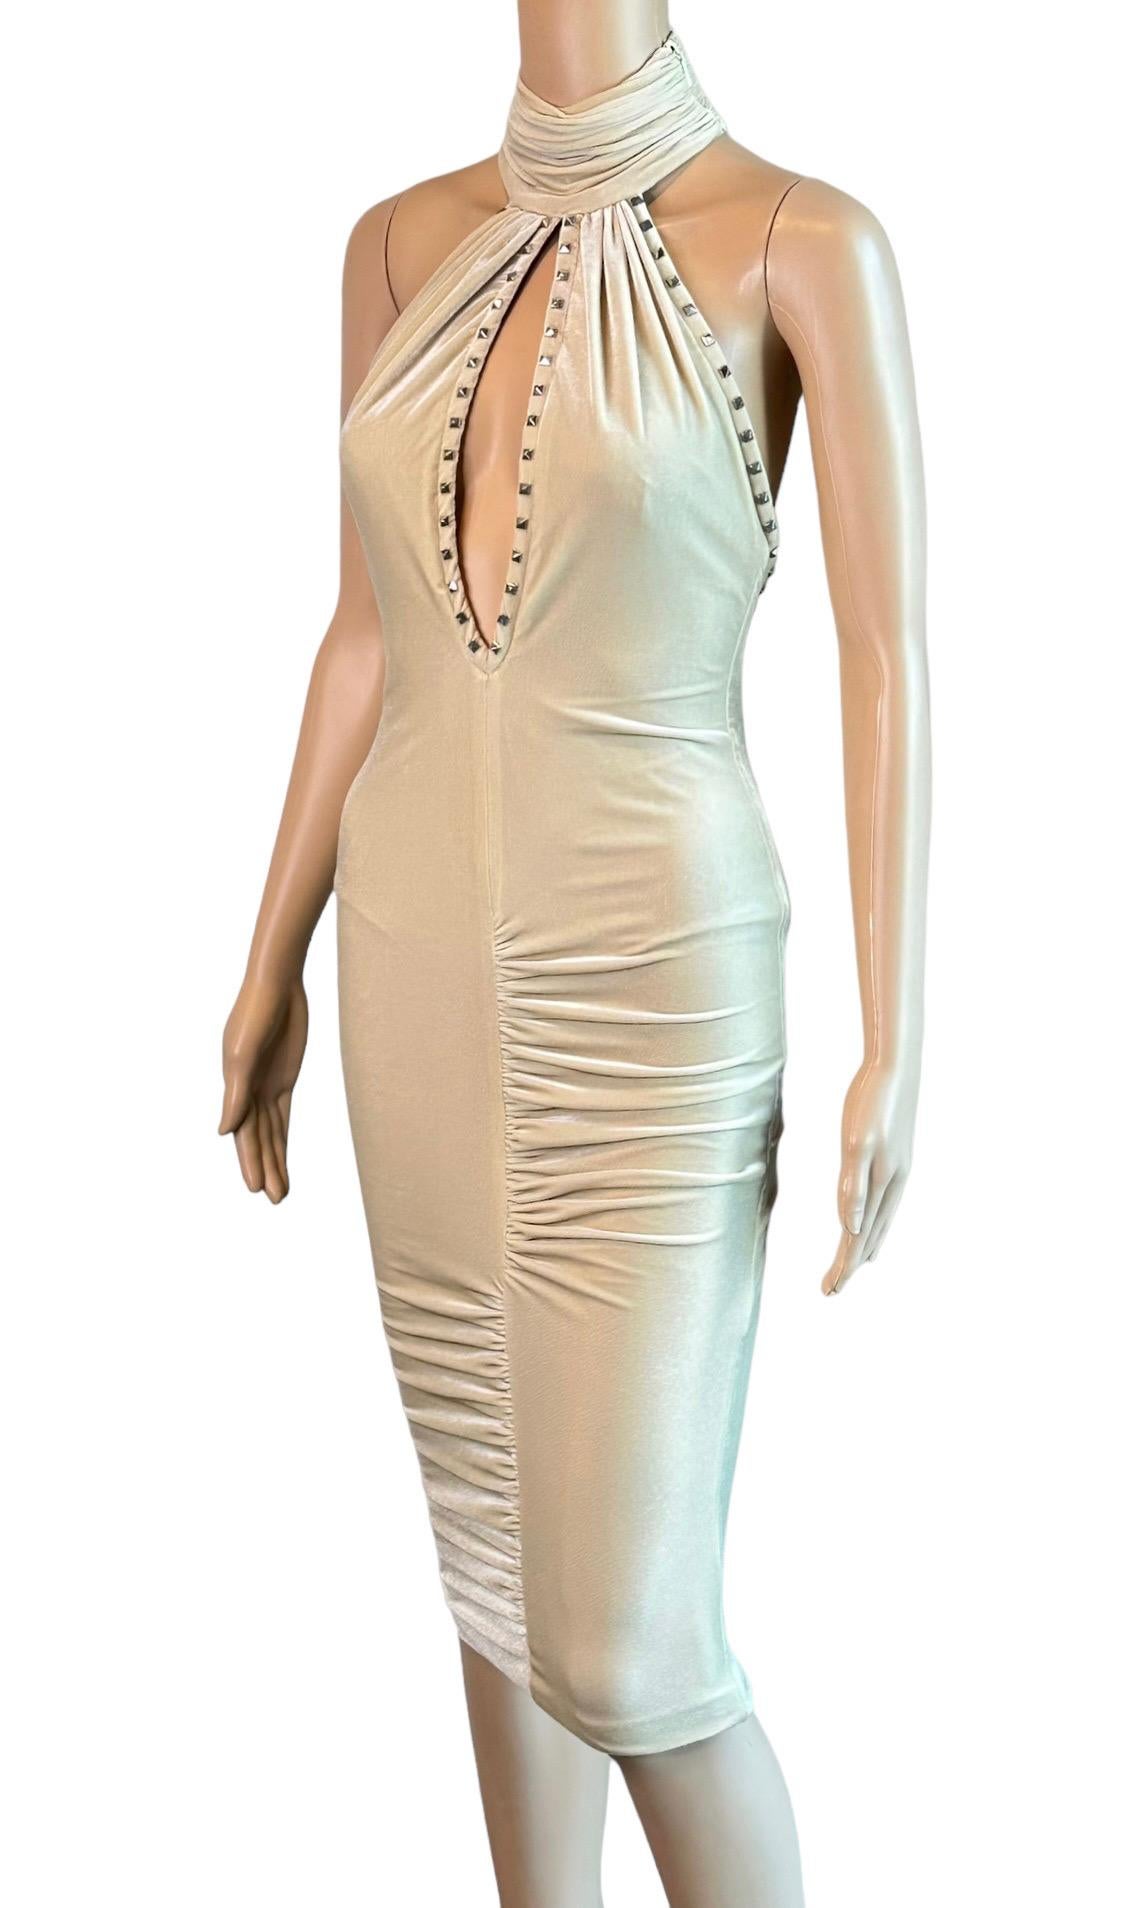 Versace F/W 2004 Runway Plunging Keyhole Cutout Back Embellished Studded Detail Dress Size IT 40

Look 45 from the Fall 2004 Collection.




